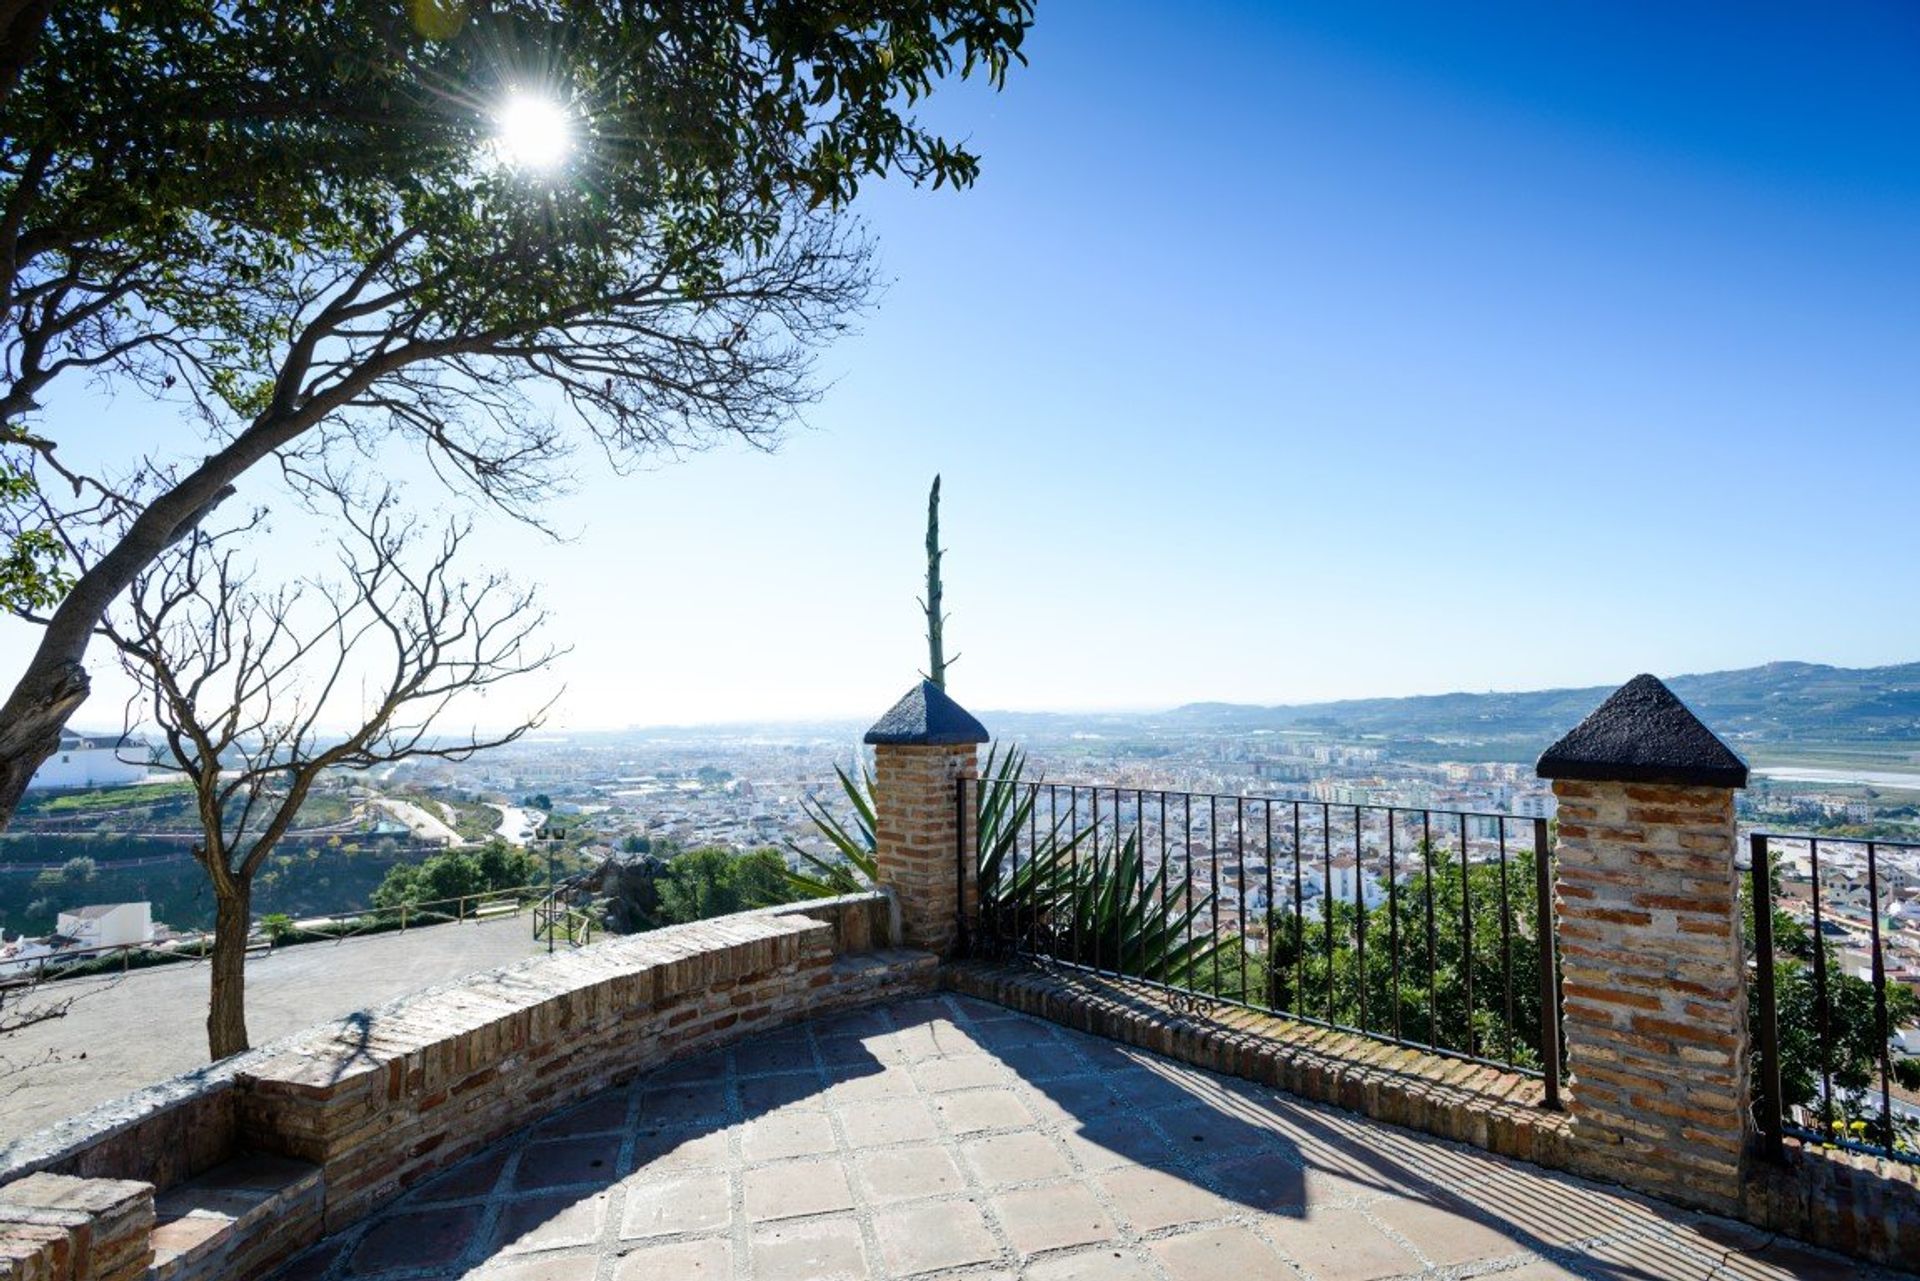 Take a day trip to Velez-Malaga and enjoy panoramic views from its Medieval 10th century fortress